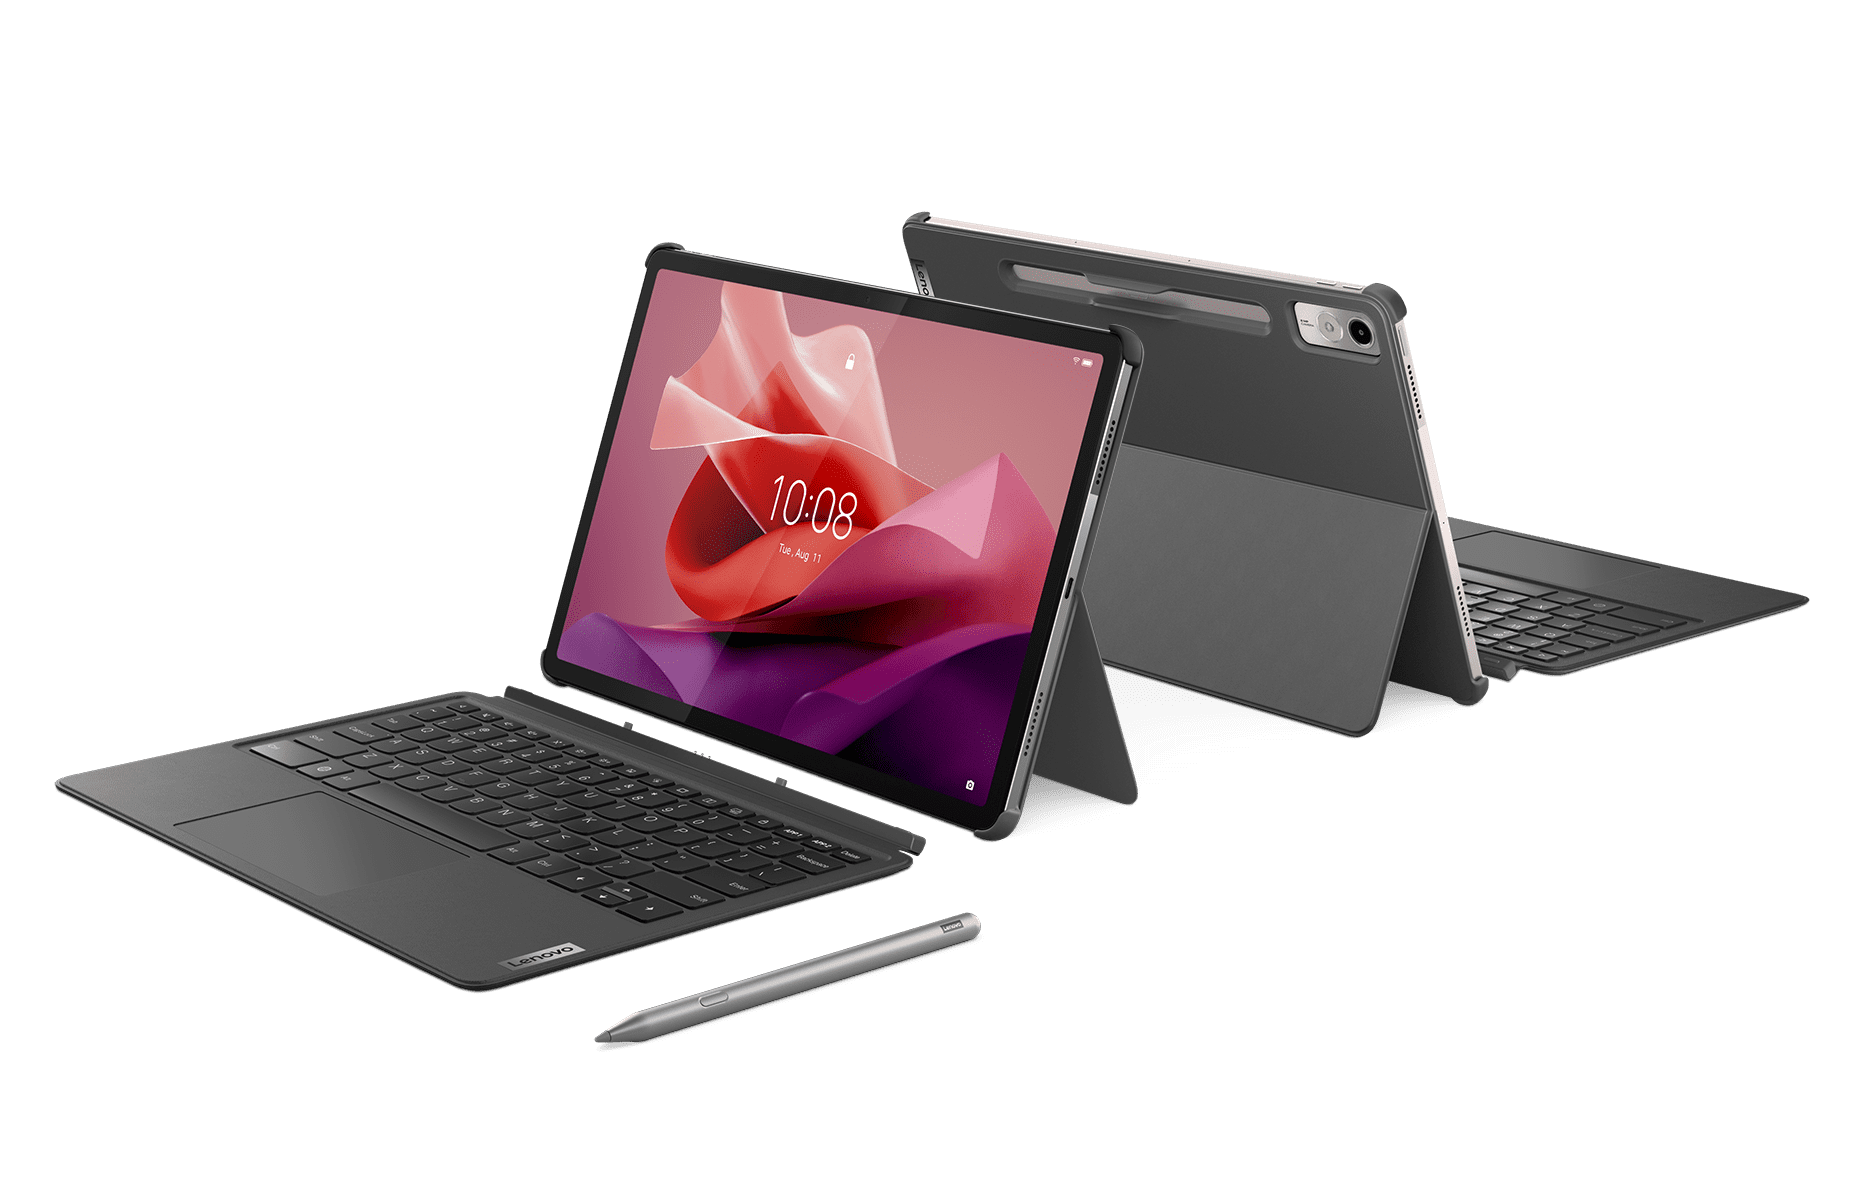 Introducing the new Lenovo Tab P12 and Tab M10 5G consumer tablets for more  learning, mobility, multitasking - Lenovo StoryHub